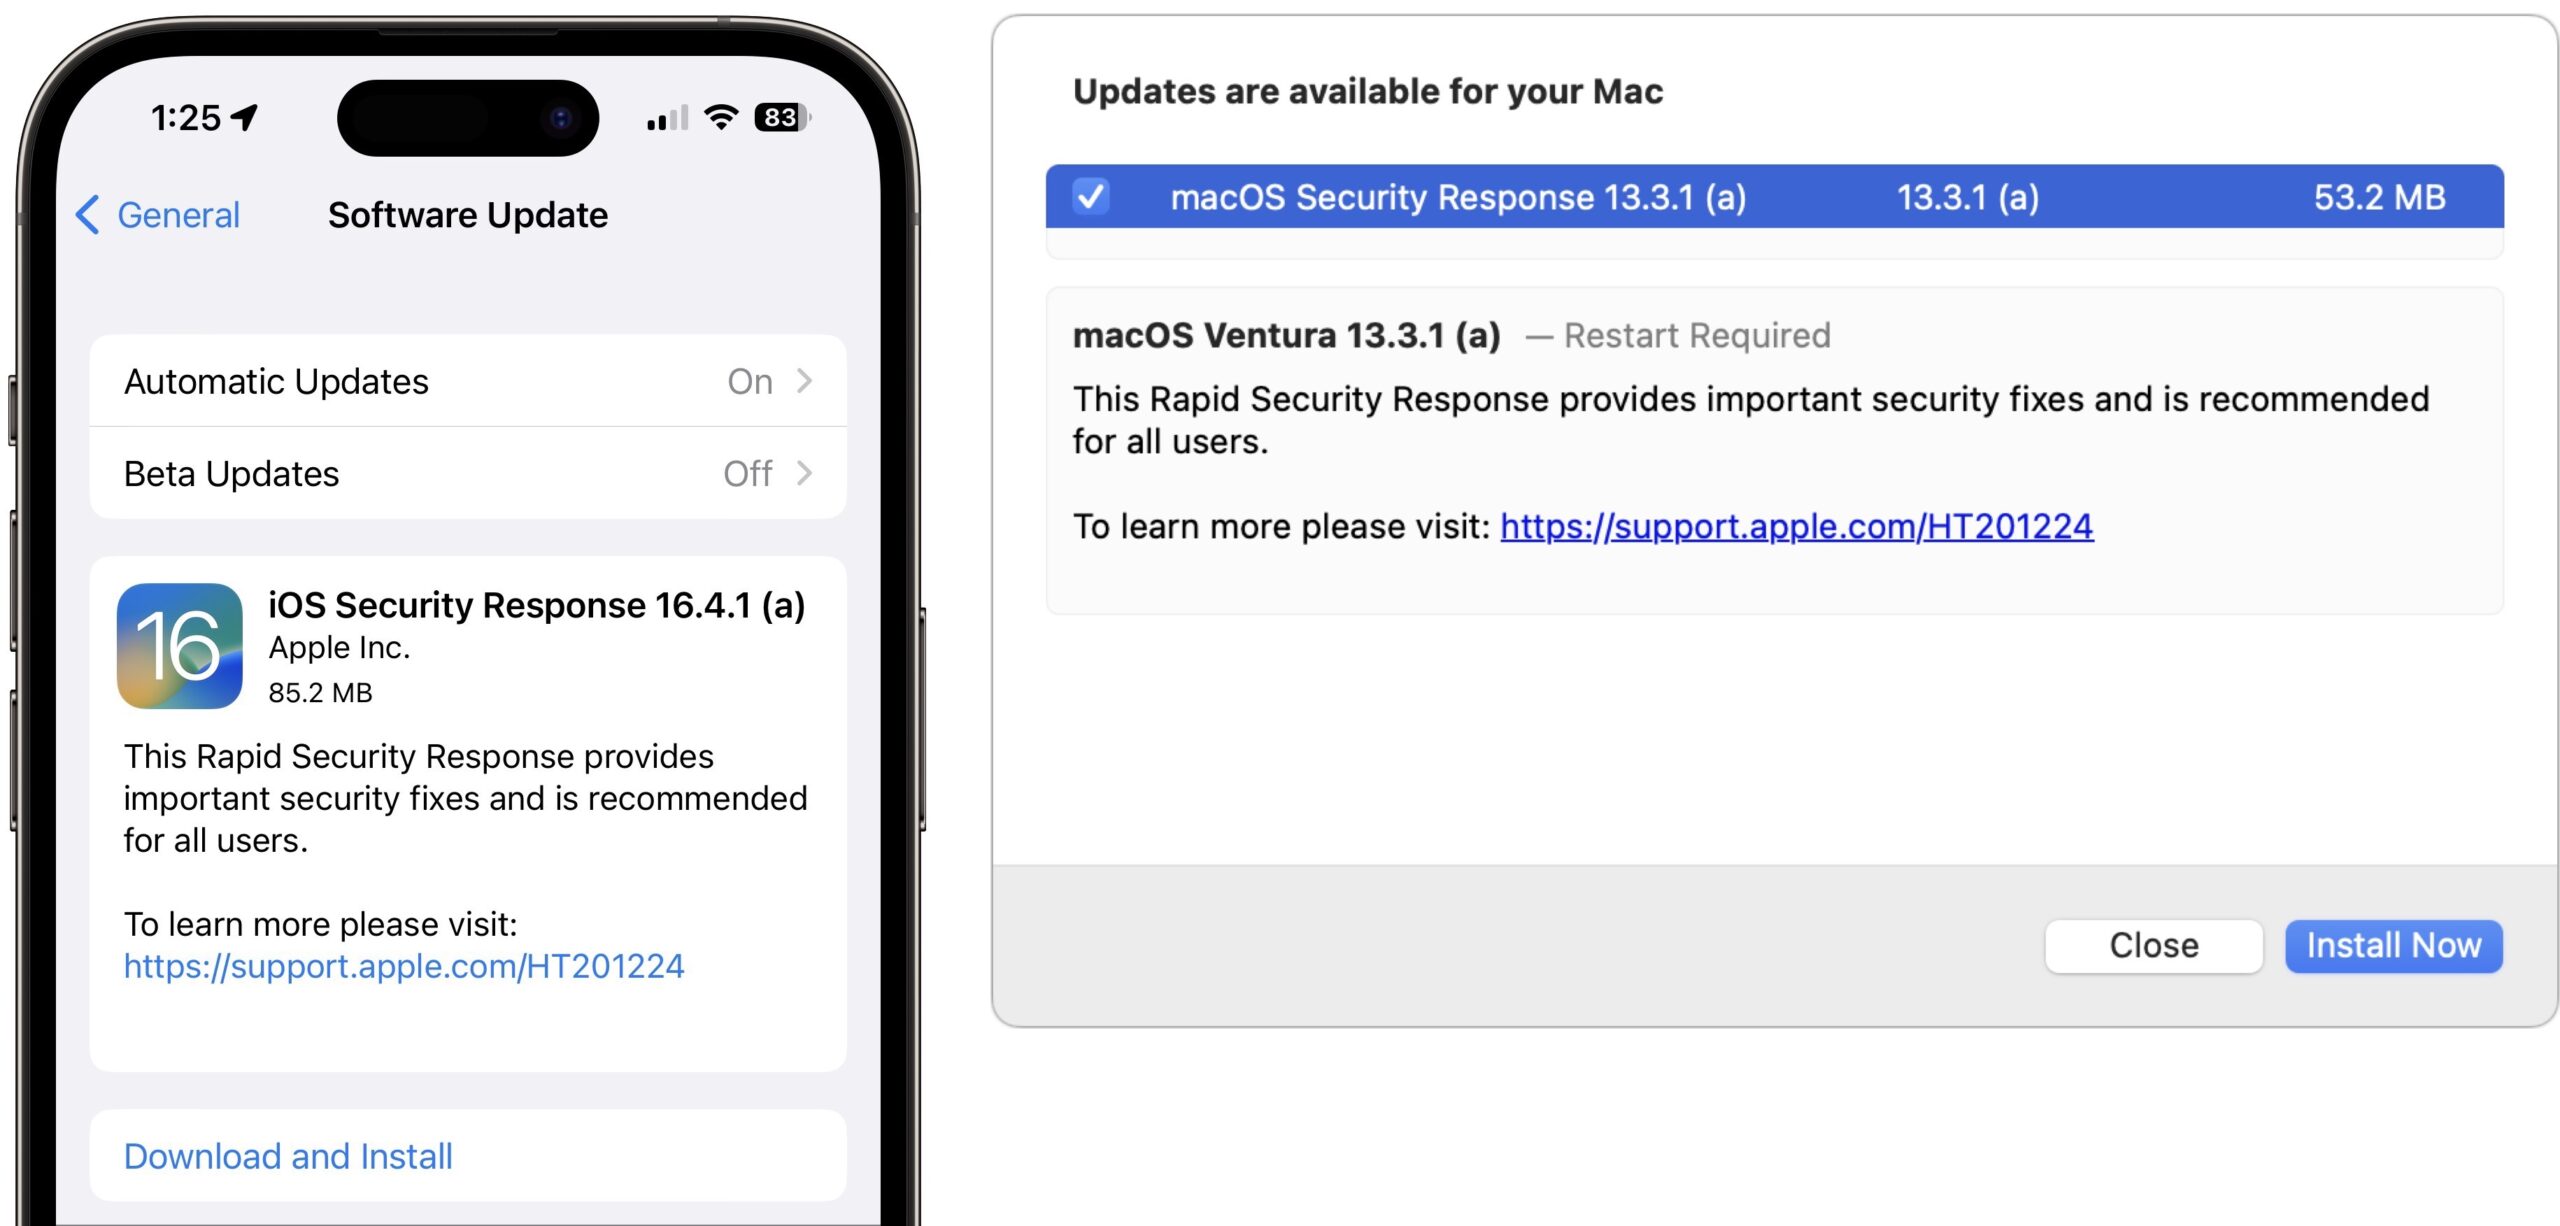 Release notes for Rapid Security Responses, such as they are